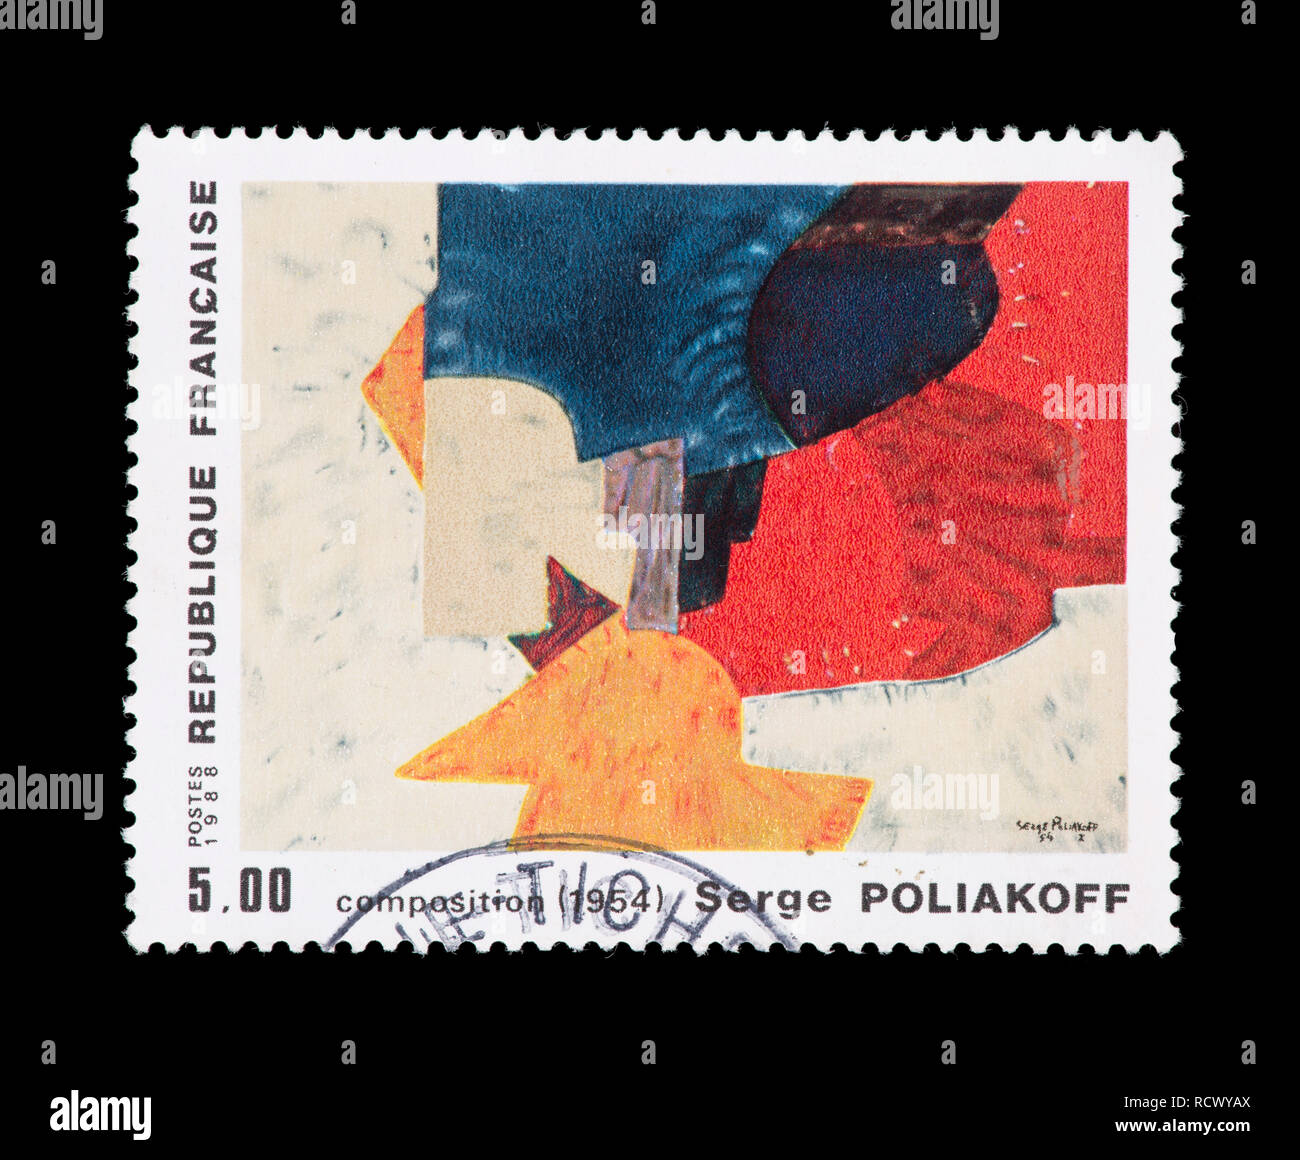 Postage stamp from France depicting the Serge Poliakoff painting 'Composition, 1954'. Stock Photo